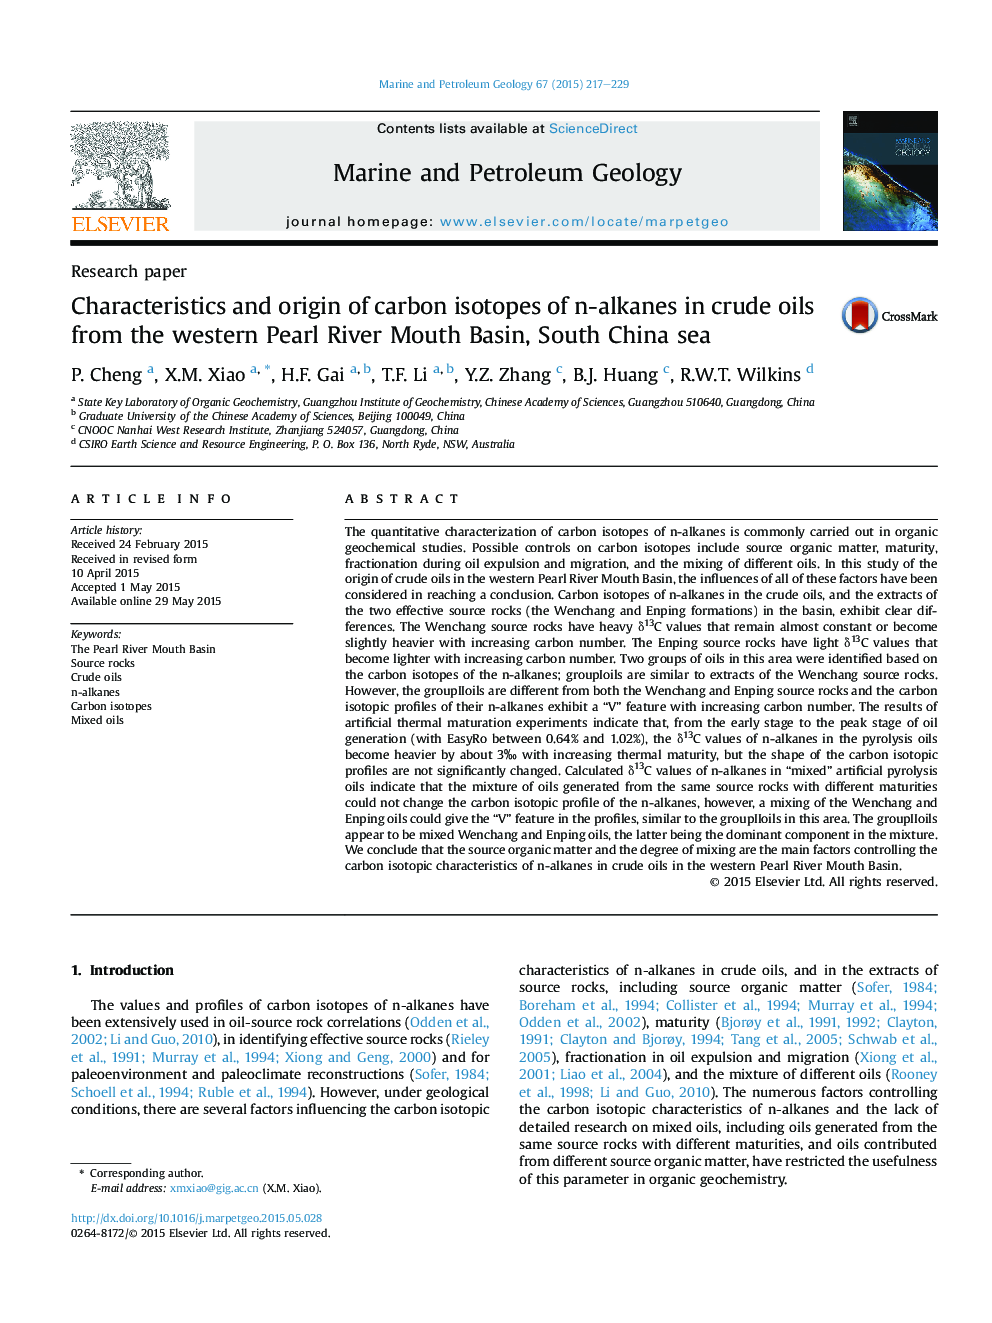 Research paperCharacteristics and origin of carbon isotopes of n-alkanes in crude oils from the western Pearl River Mouth Basin, South China sea